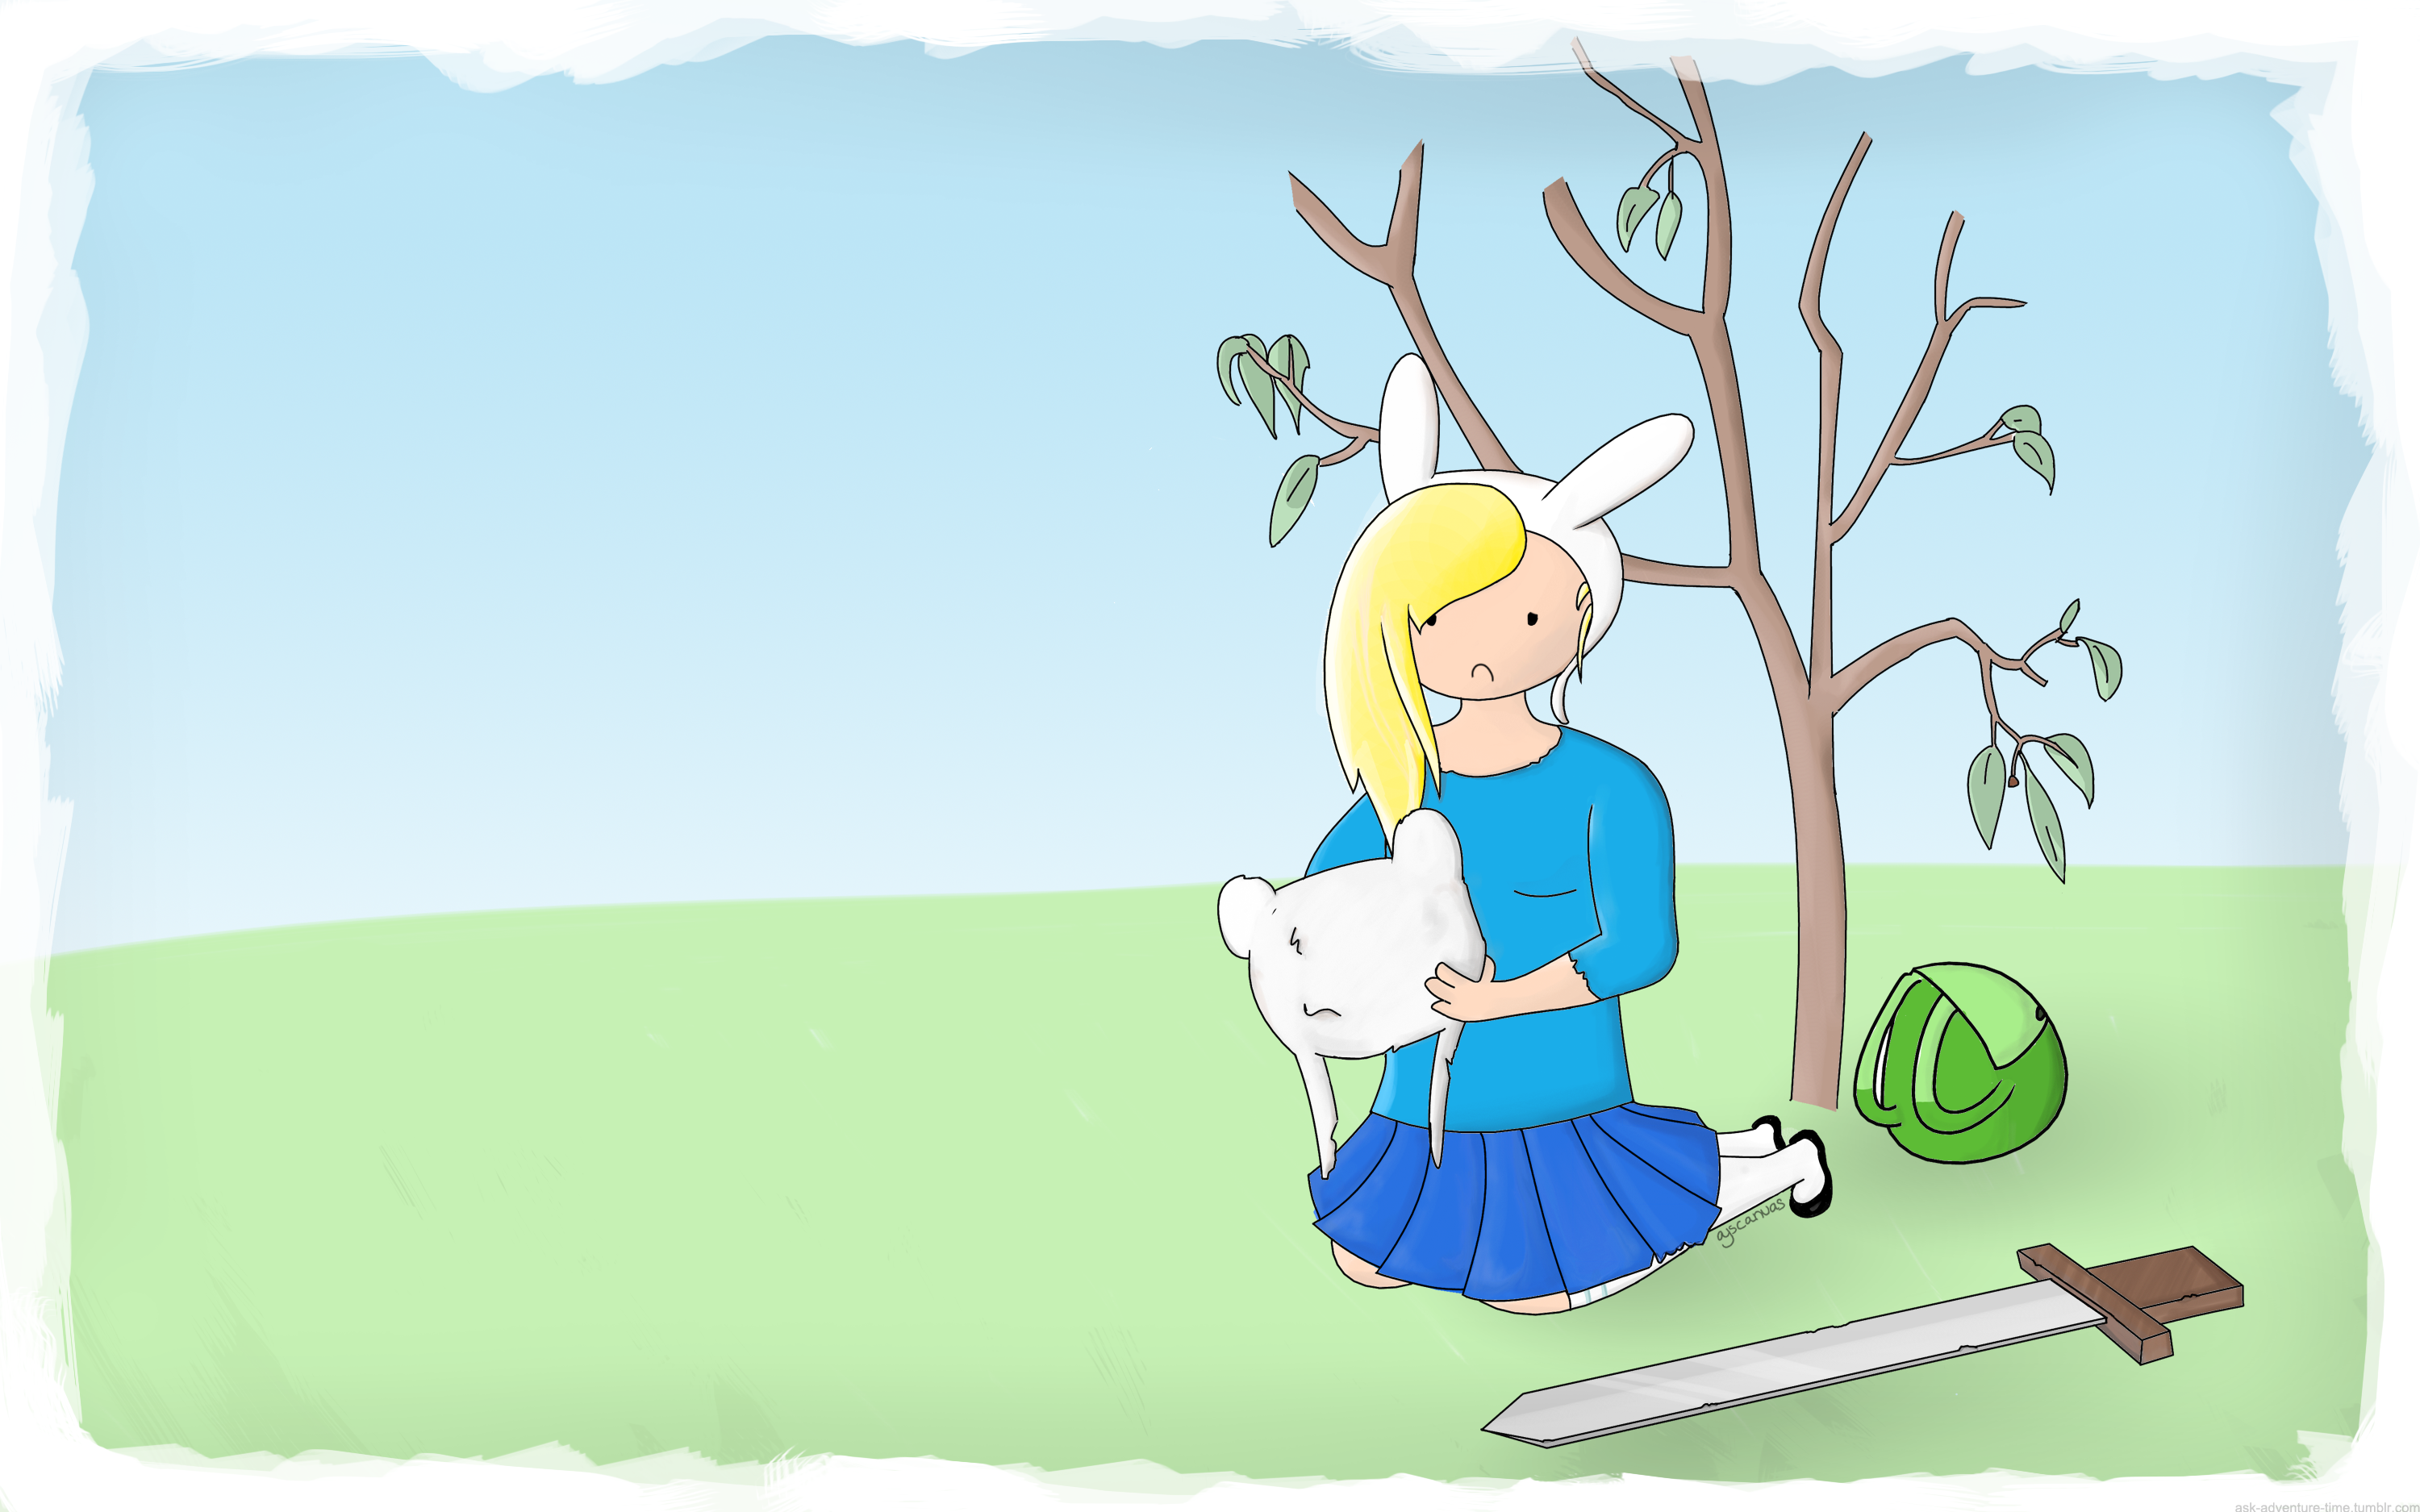 Adventure Time Fionna The Human Wallpaper Images Pictures   Becuo